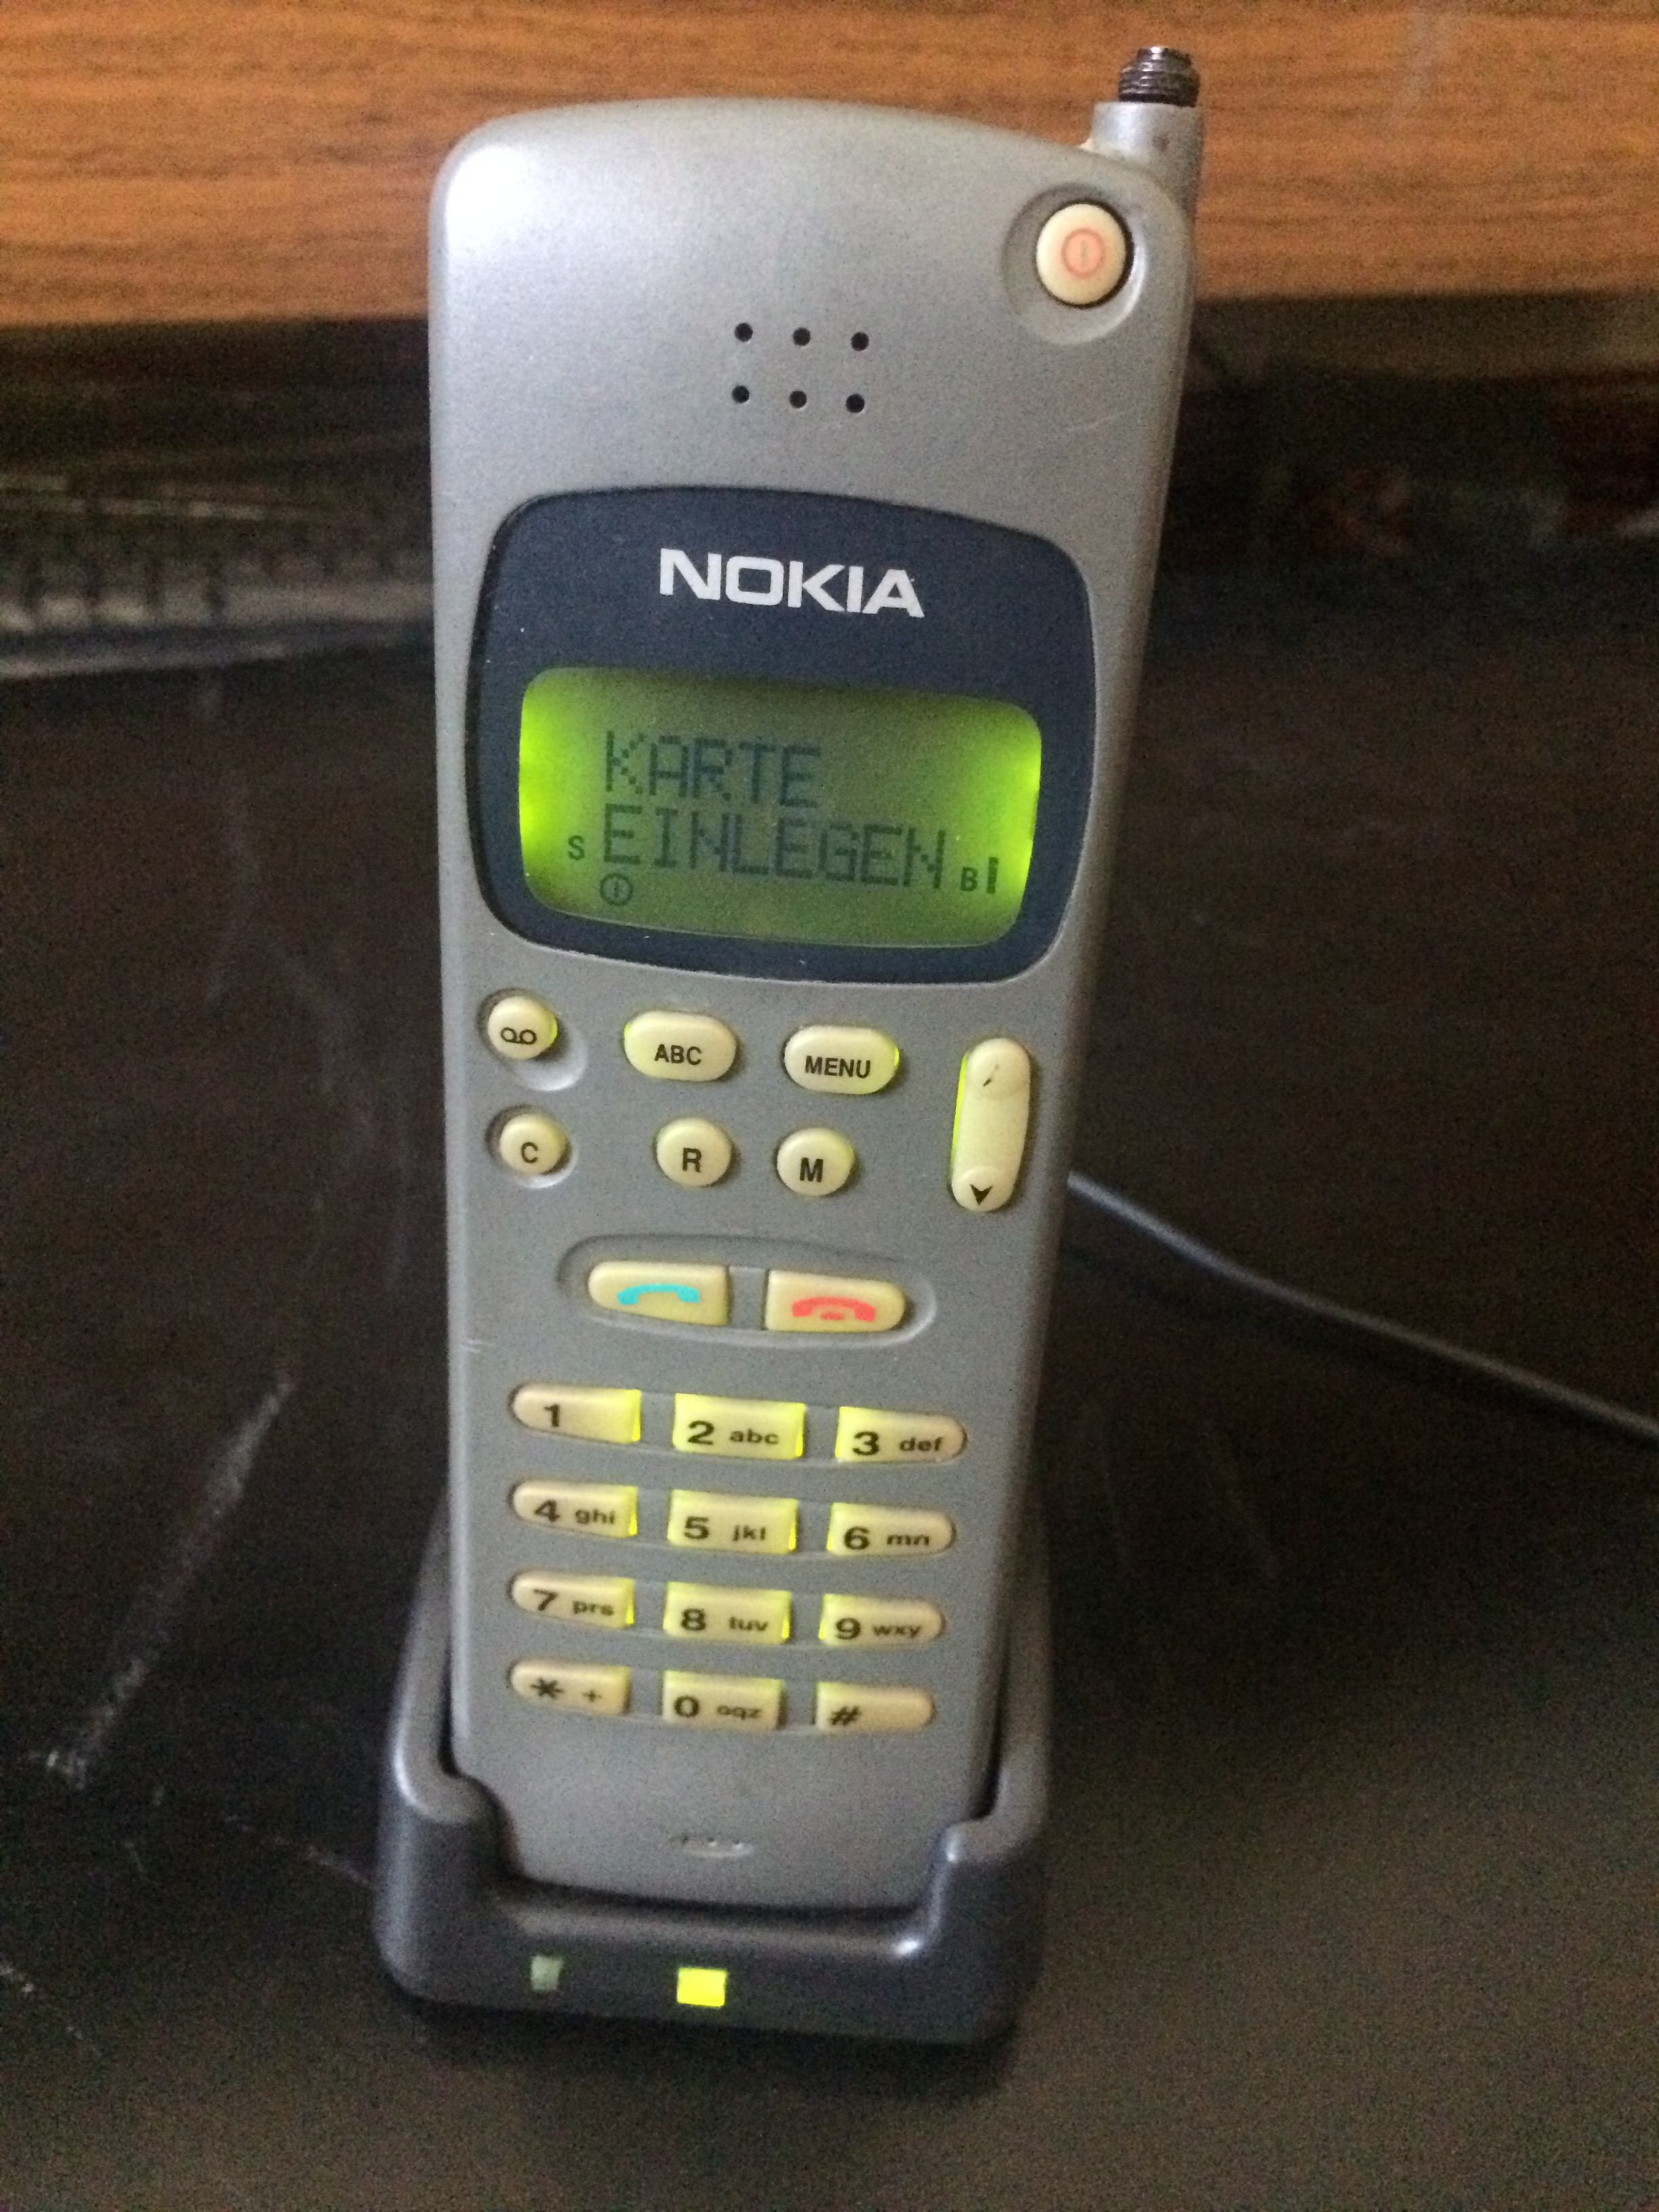 Nokia Cellphone has started